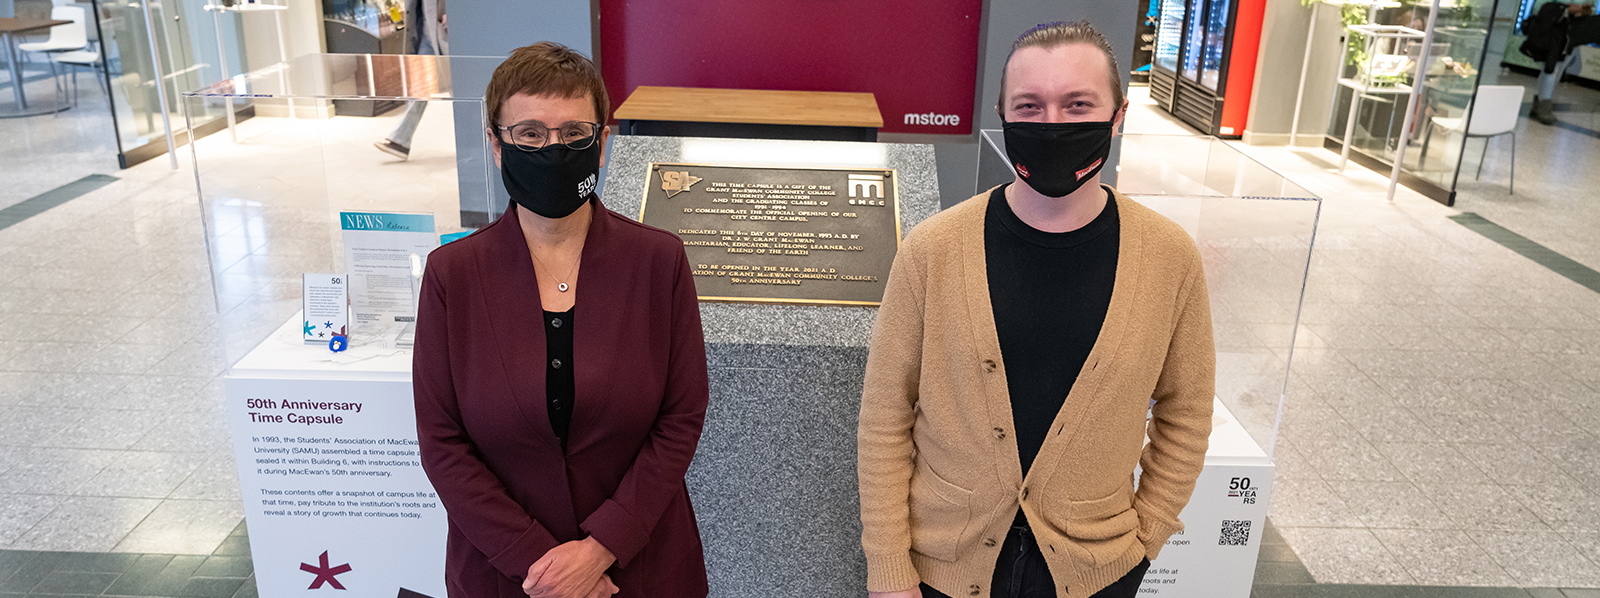 Dr. Annette Trimbee, president and vice-chancellor, and Myles Dykestra, SAMU president, unveil two new exhibits beside the original time capsule that highlight a selection of its contents.